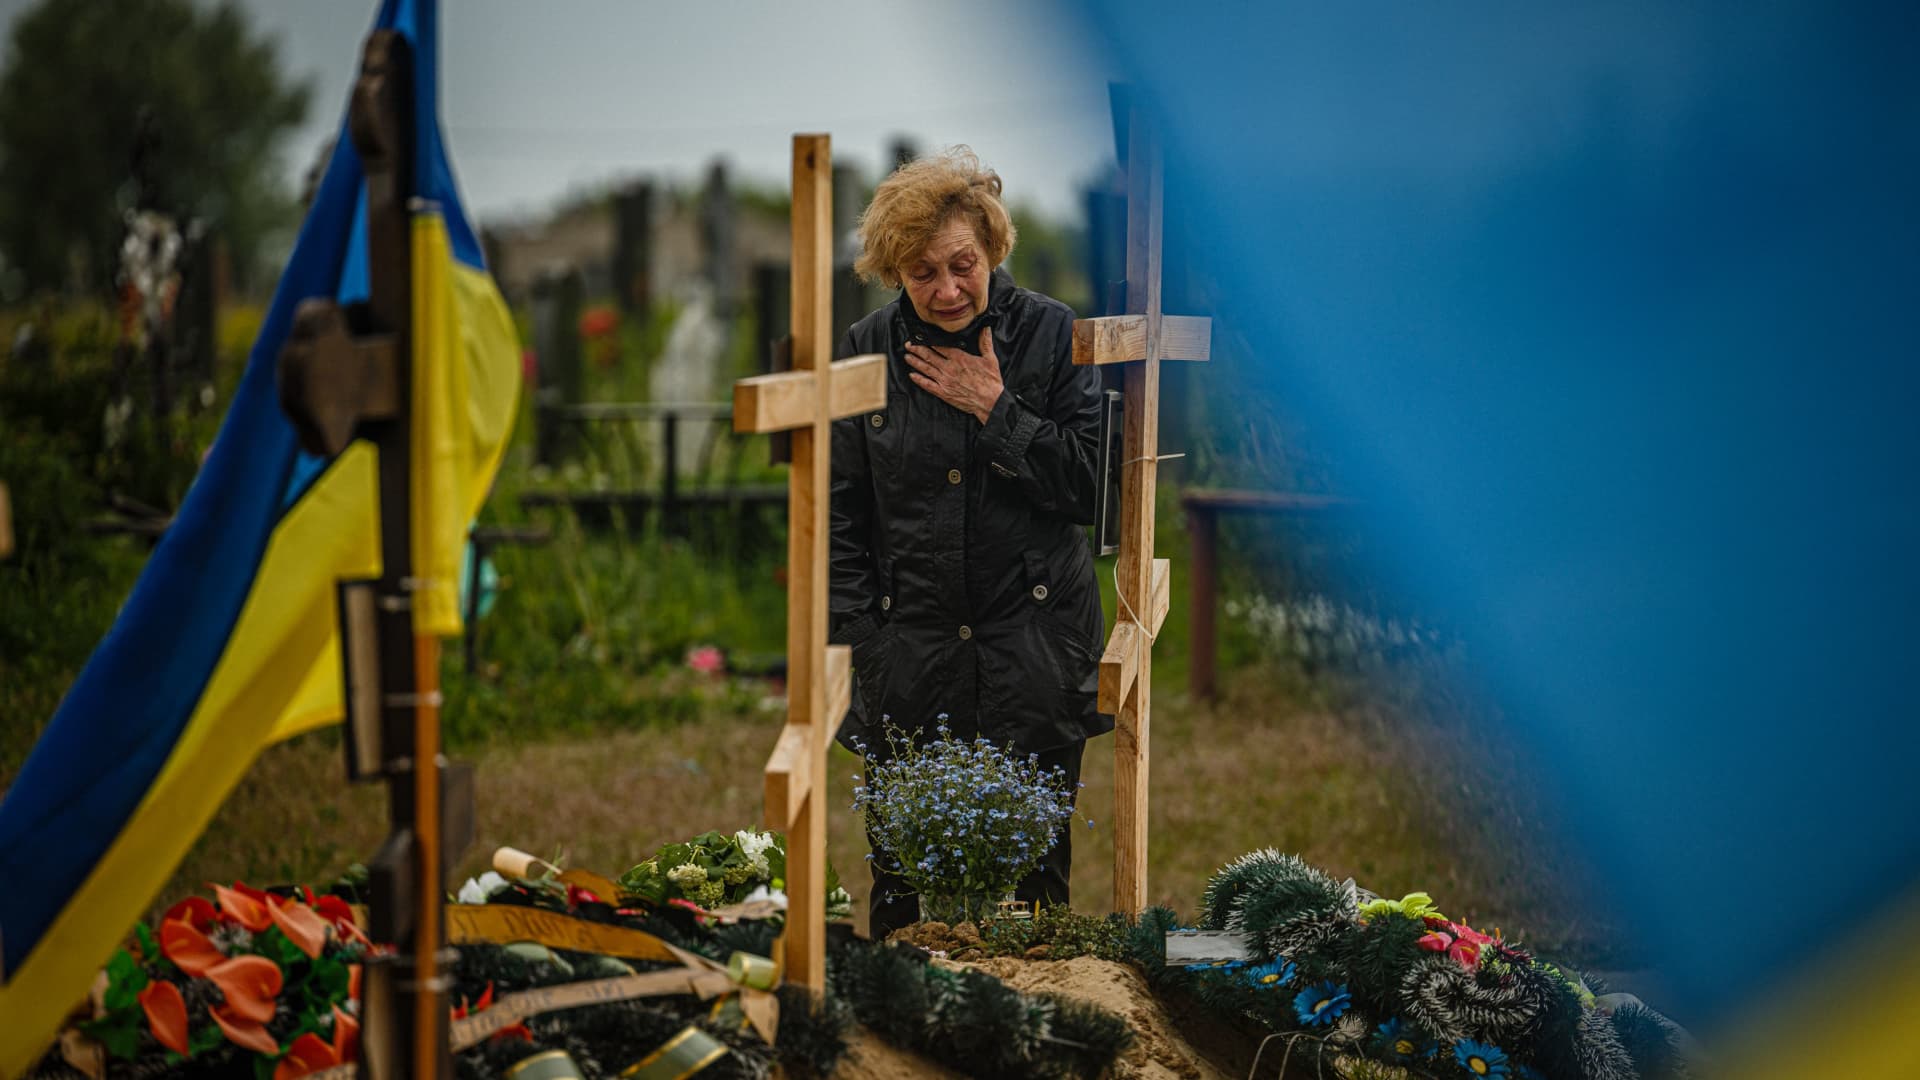 A woman mourns while visiting the grave of Stanislav Hvostov, 22, a Ukrainian serviceman killed during the Russian invasion of Ukraine, in the military section of the Kharkiv cemetery number 18 in Bezlioudivka, eastern Ukraine on May 21, 2022.